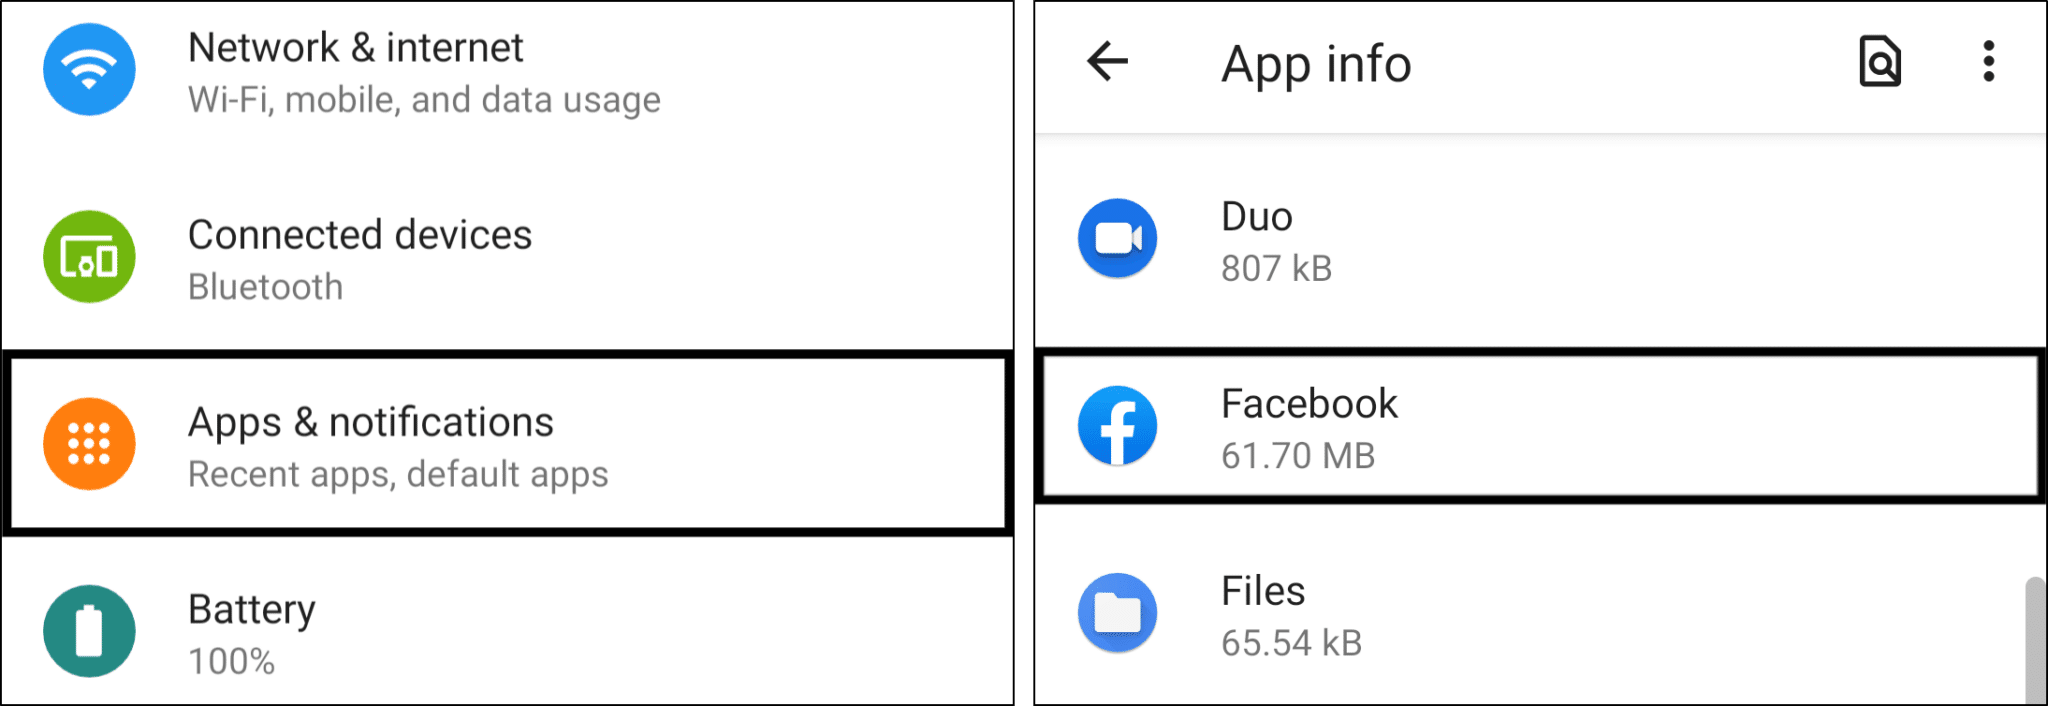 access Facebook app settings in system settings on Android to clear cache and data and fix can't like Facebook posts or share button not working or showing